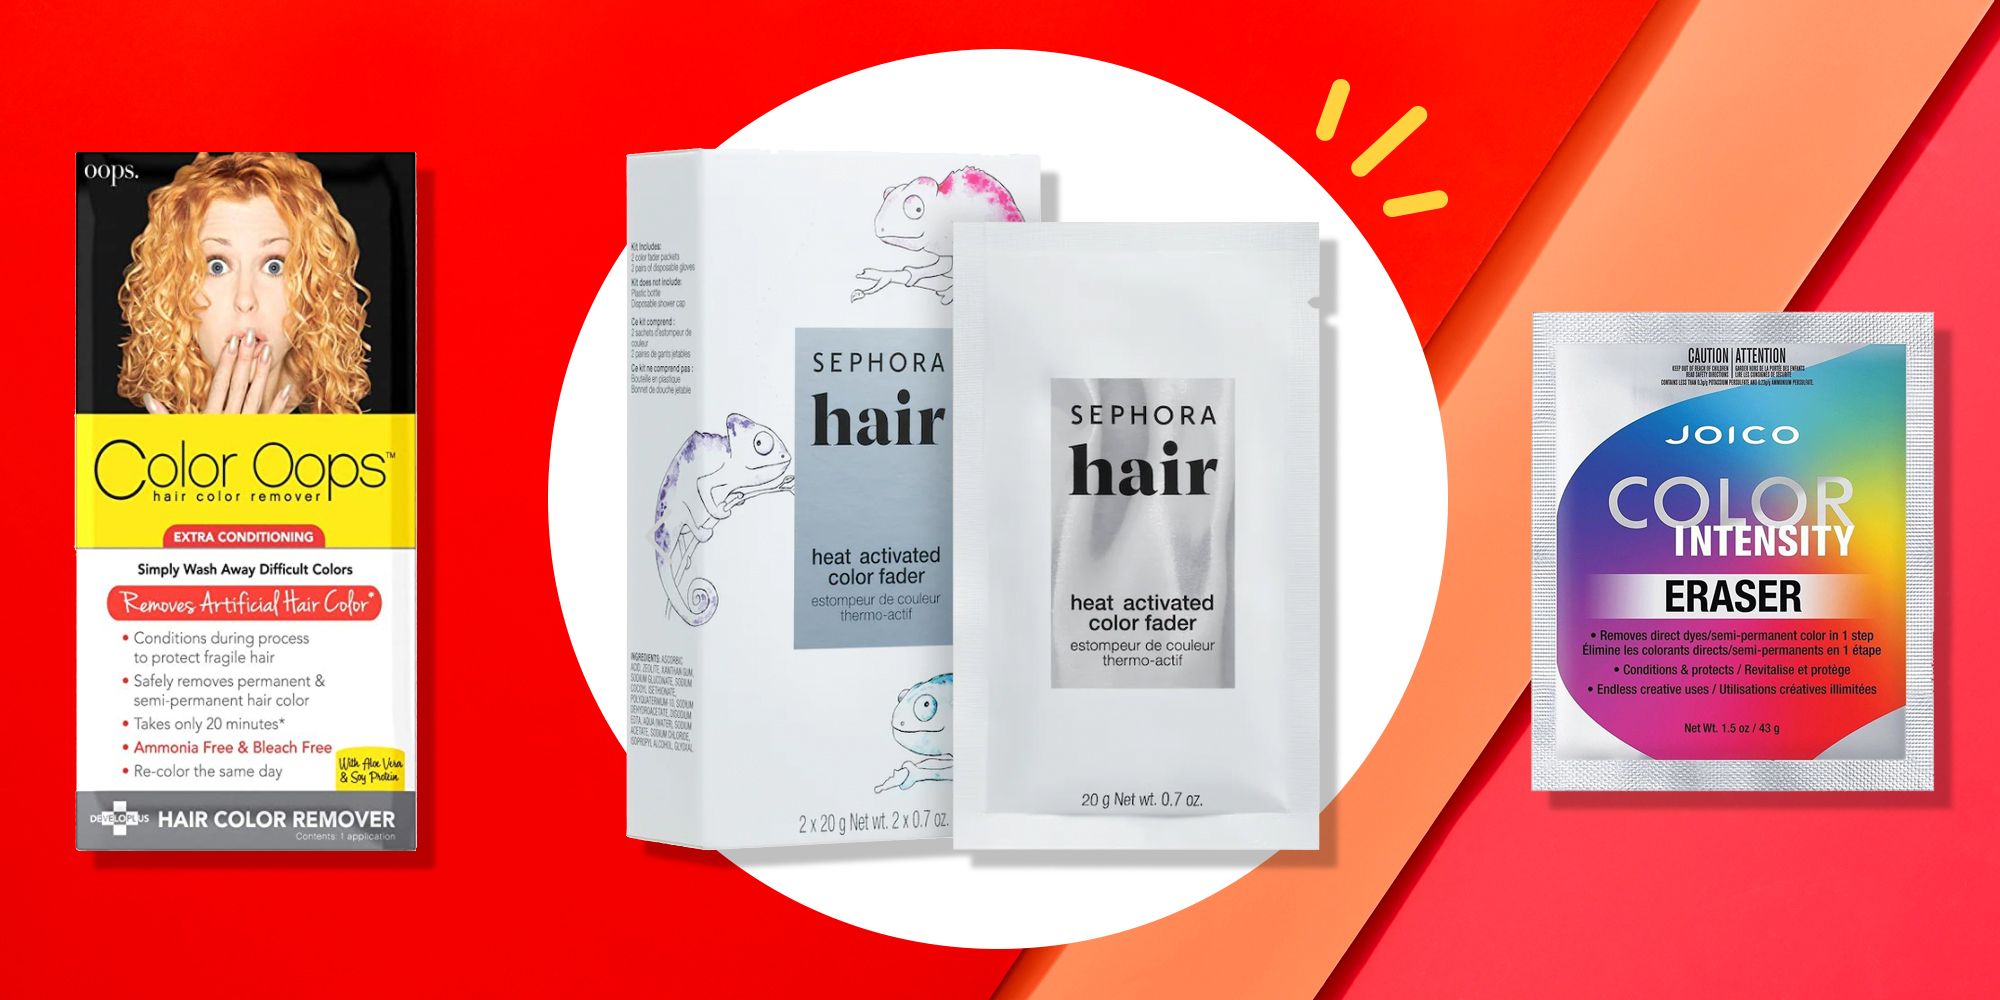 The 10 Best Hair Color Removers and Correctors 2022 image